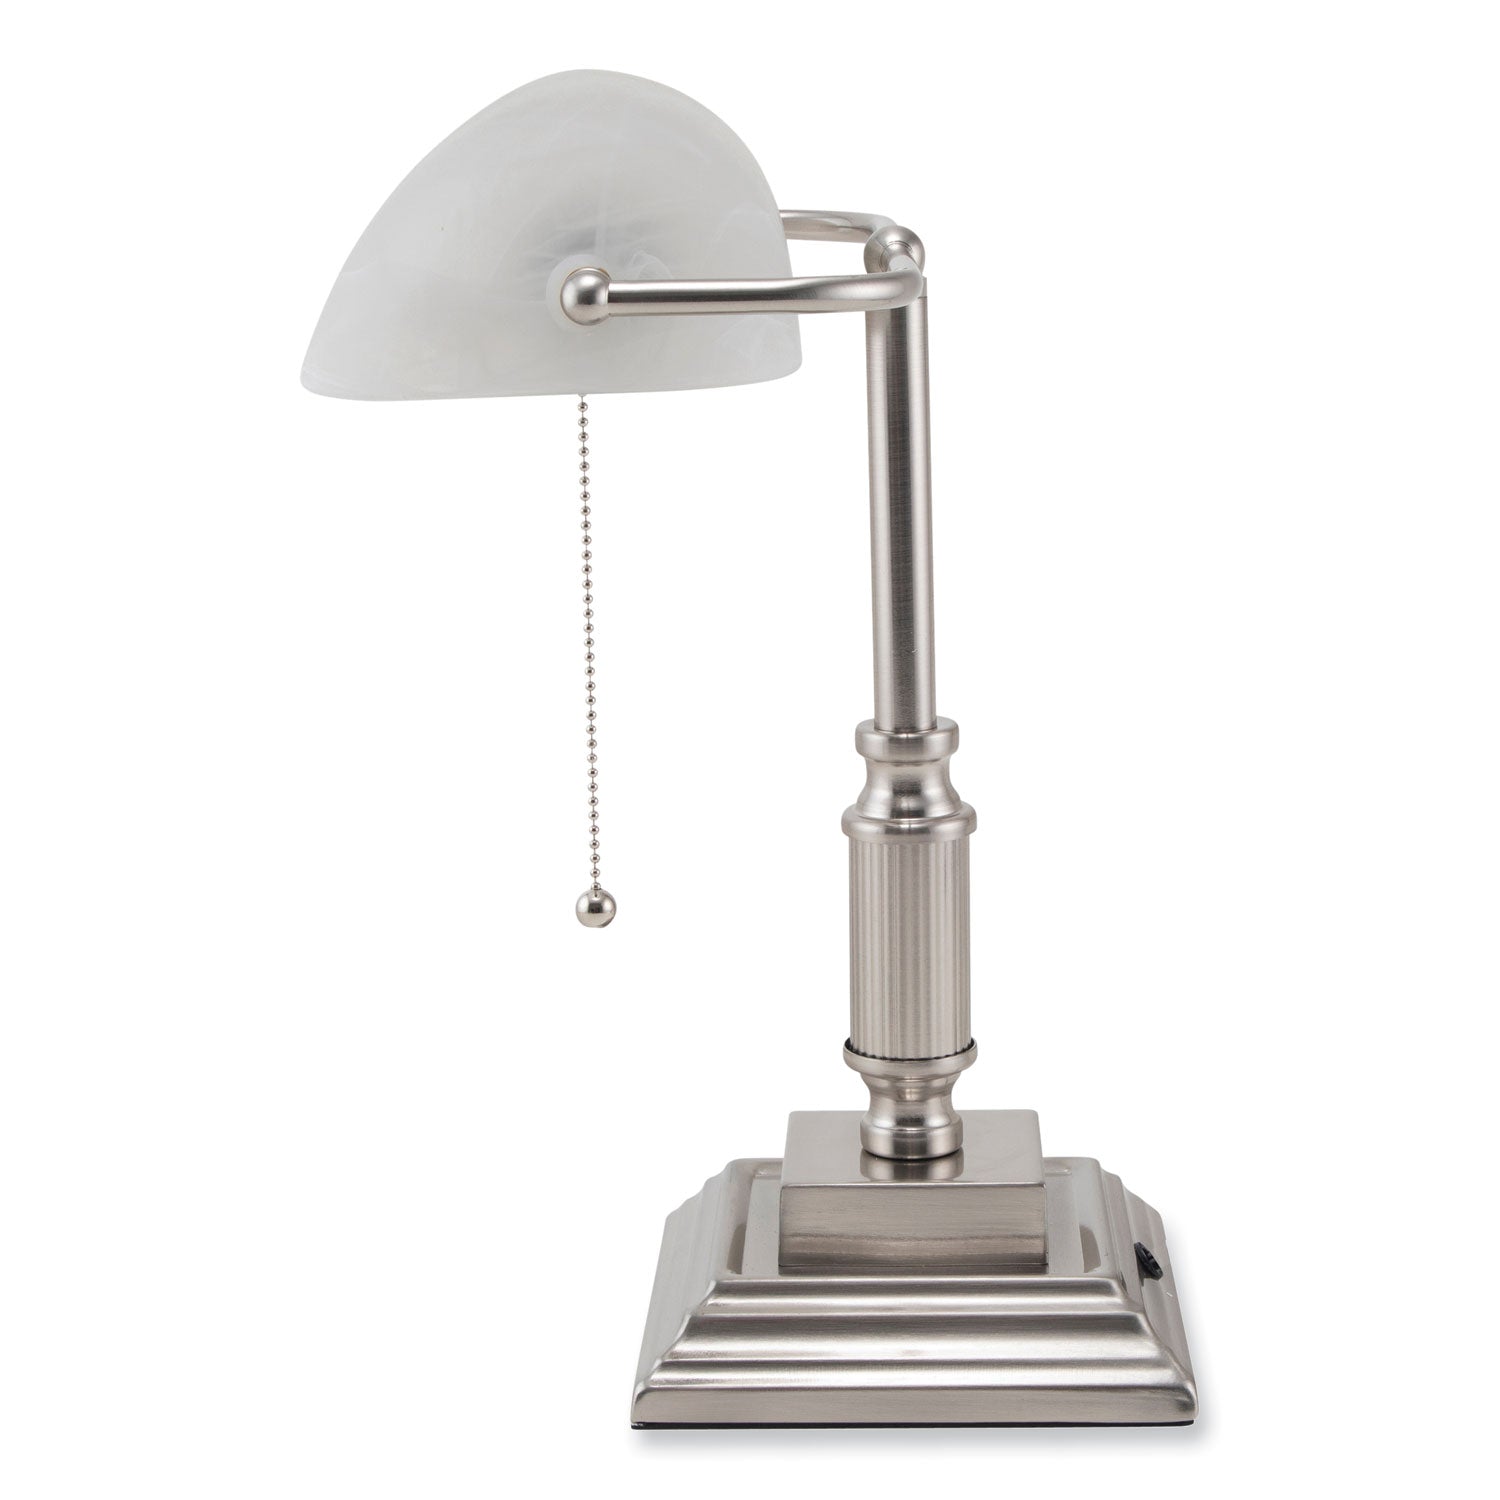 led-bankers-lamp-with-frosted-shade-1475-high-brushed-nickel-ships-in-4-6-business-days_vlu8vs688029bn - 5